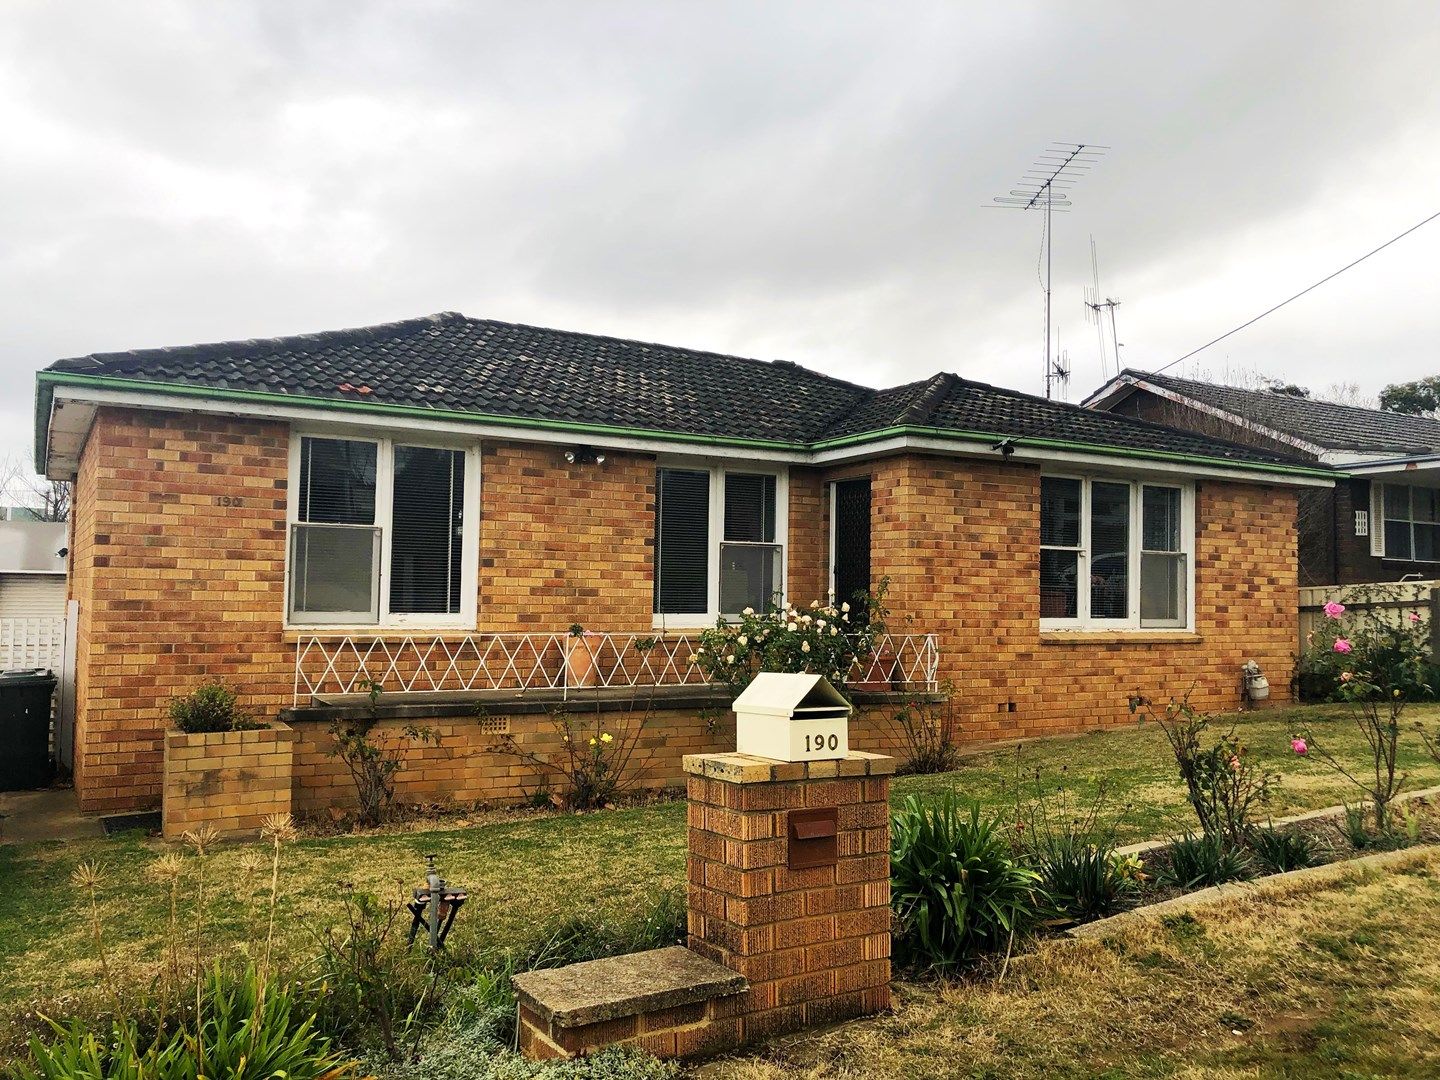 3 bedrooms House in 190 Clinton Street GOULBURN NSW, 2580